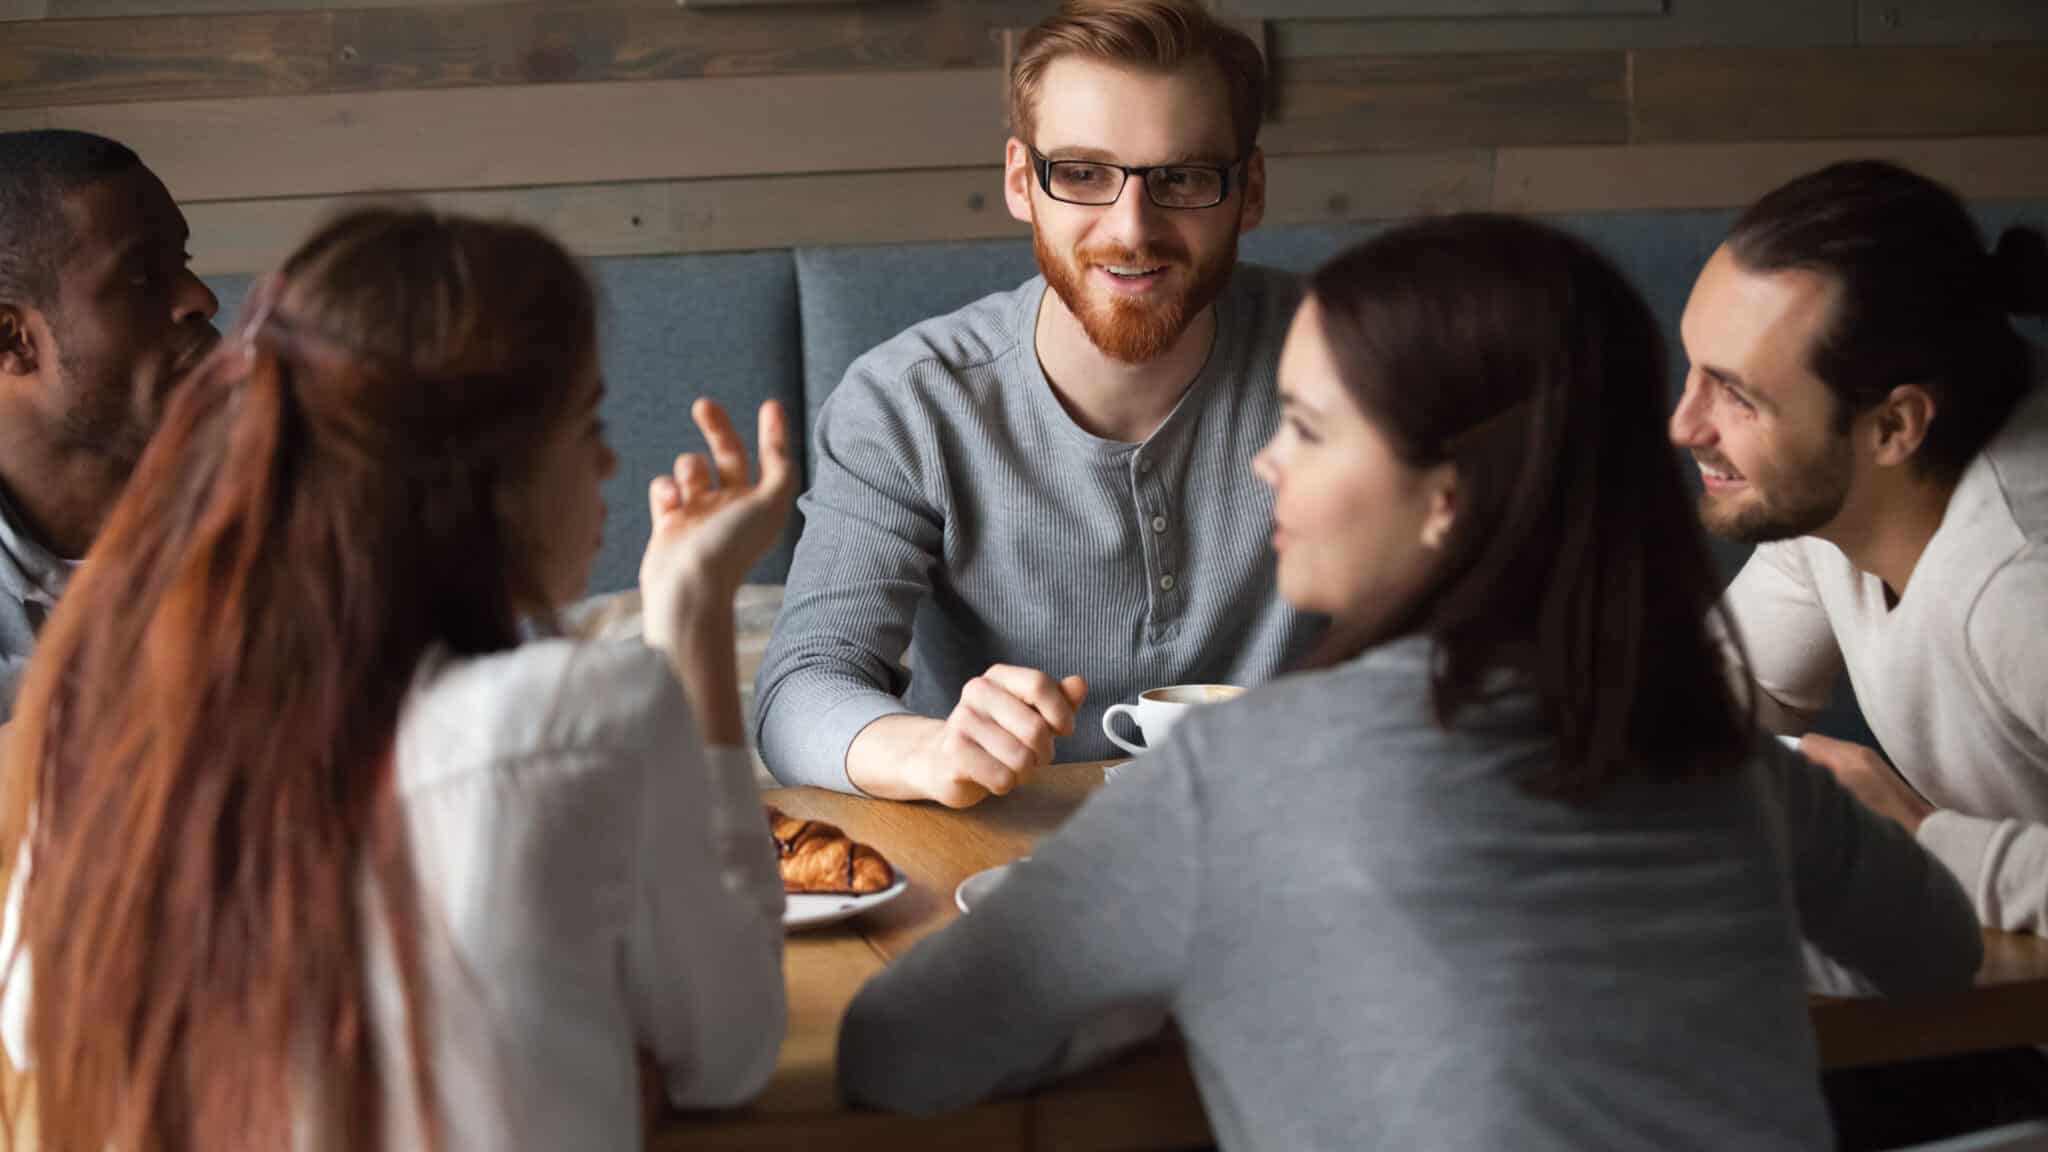 people talking and eating at a table